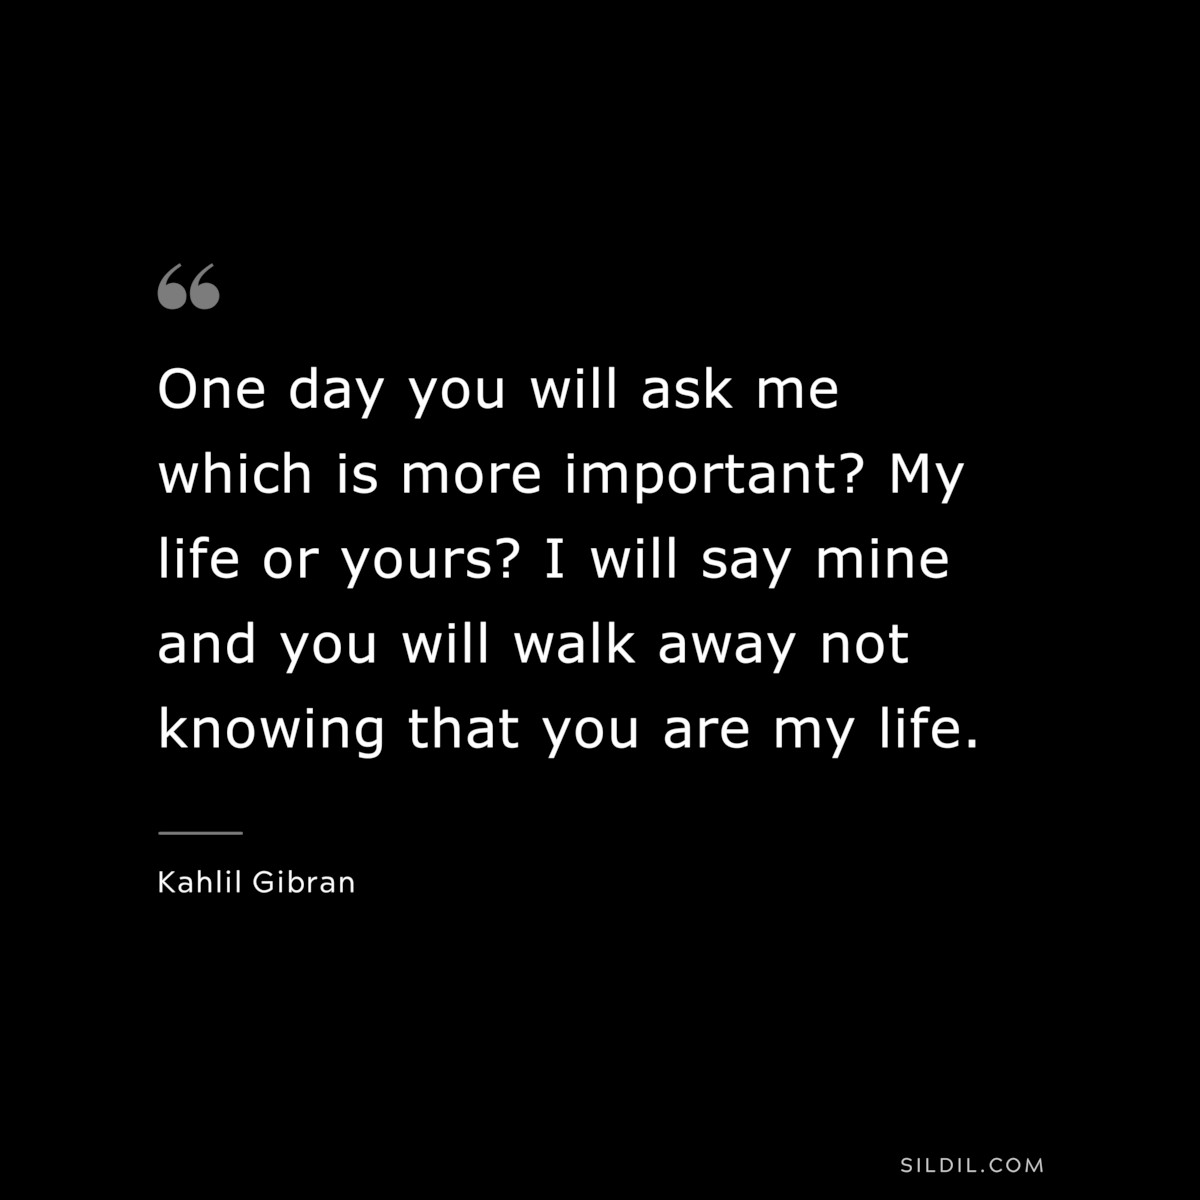 One day you will ask me which is more important? My life or yours? I will say mine and you will walk away not knowing that you are my life. ― Kahlil Gibran